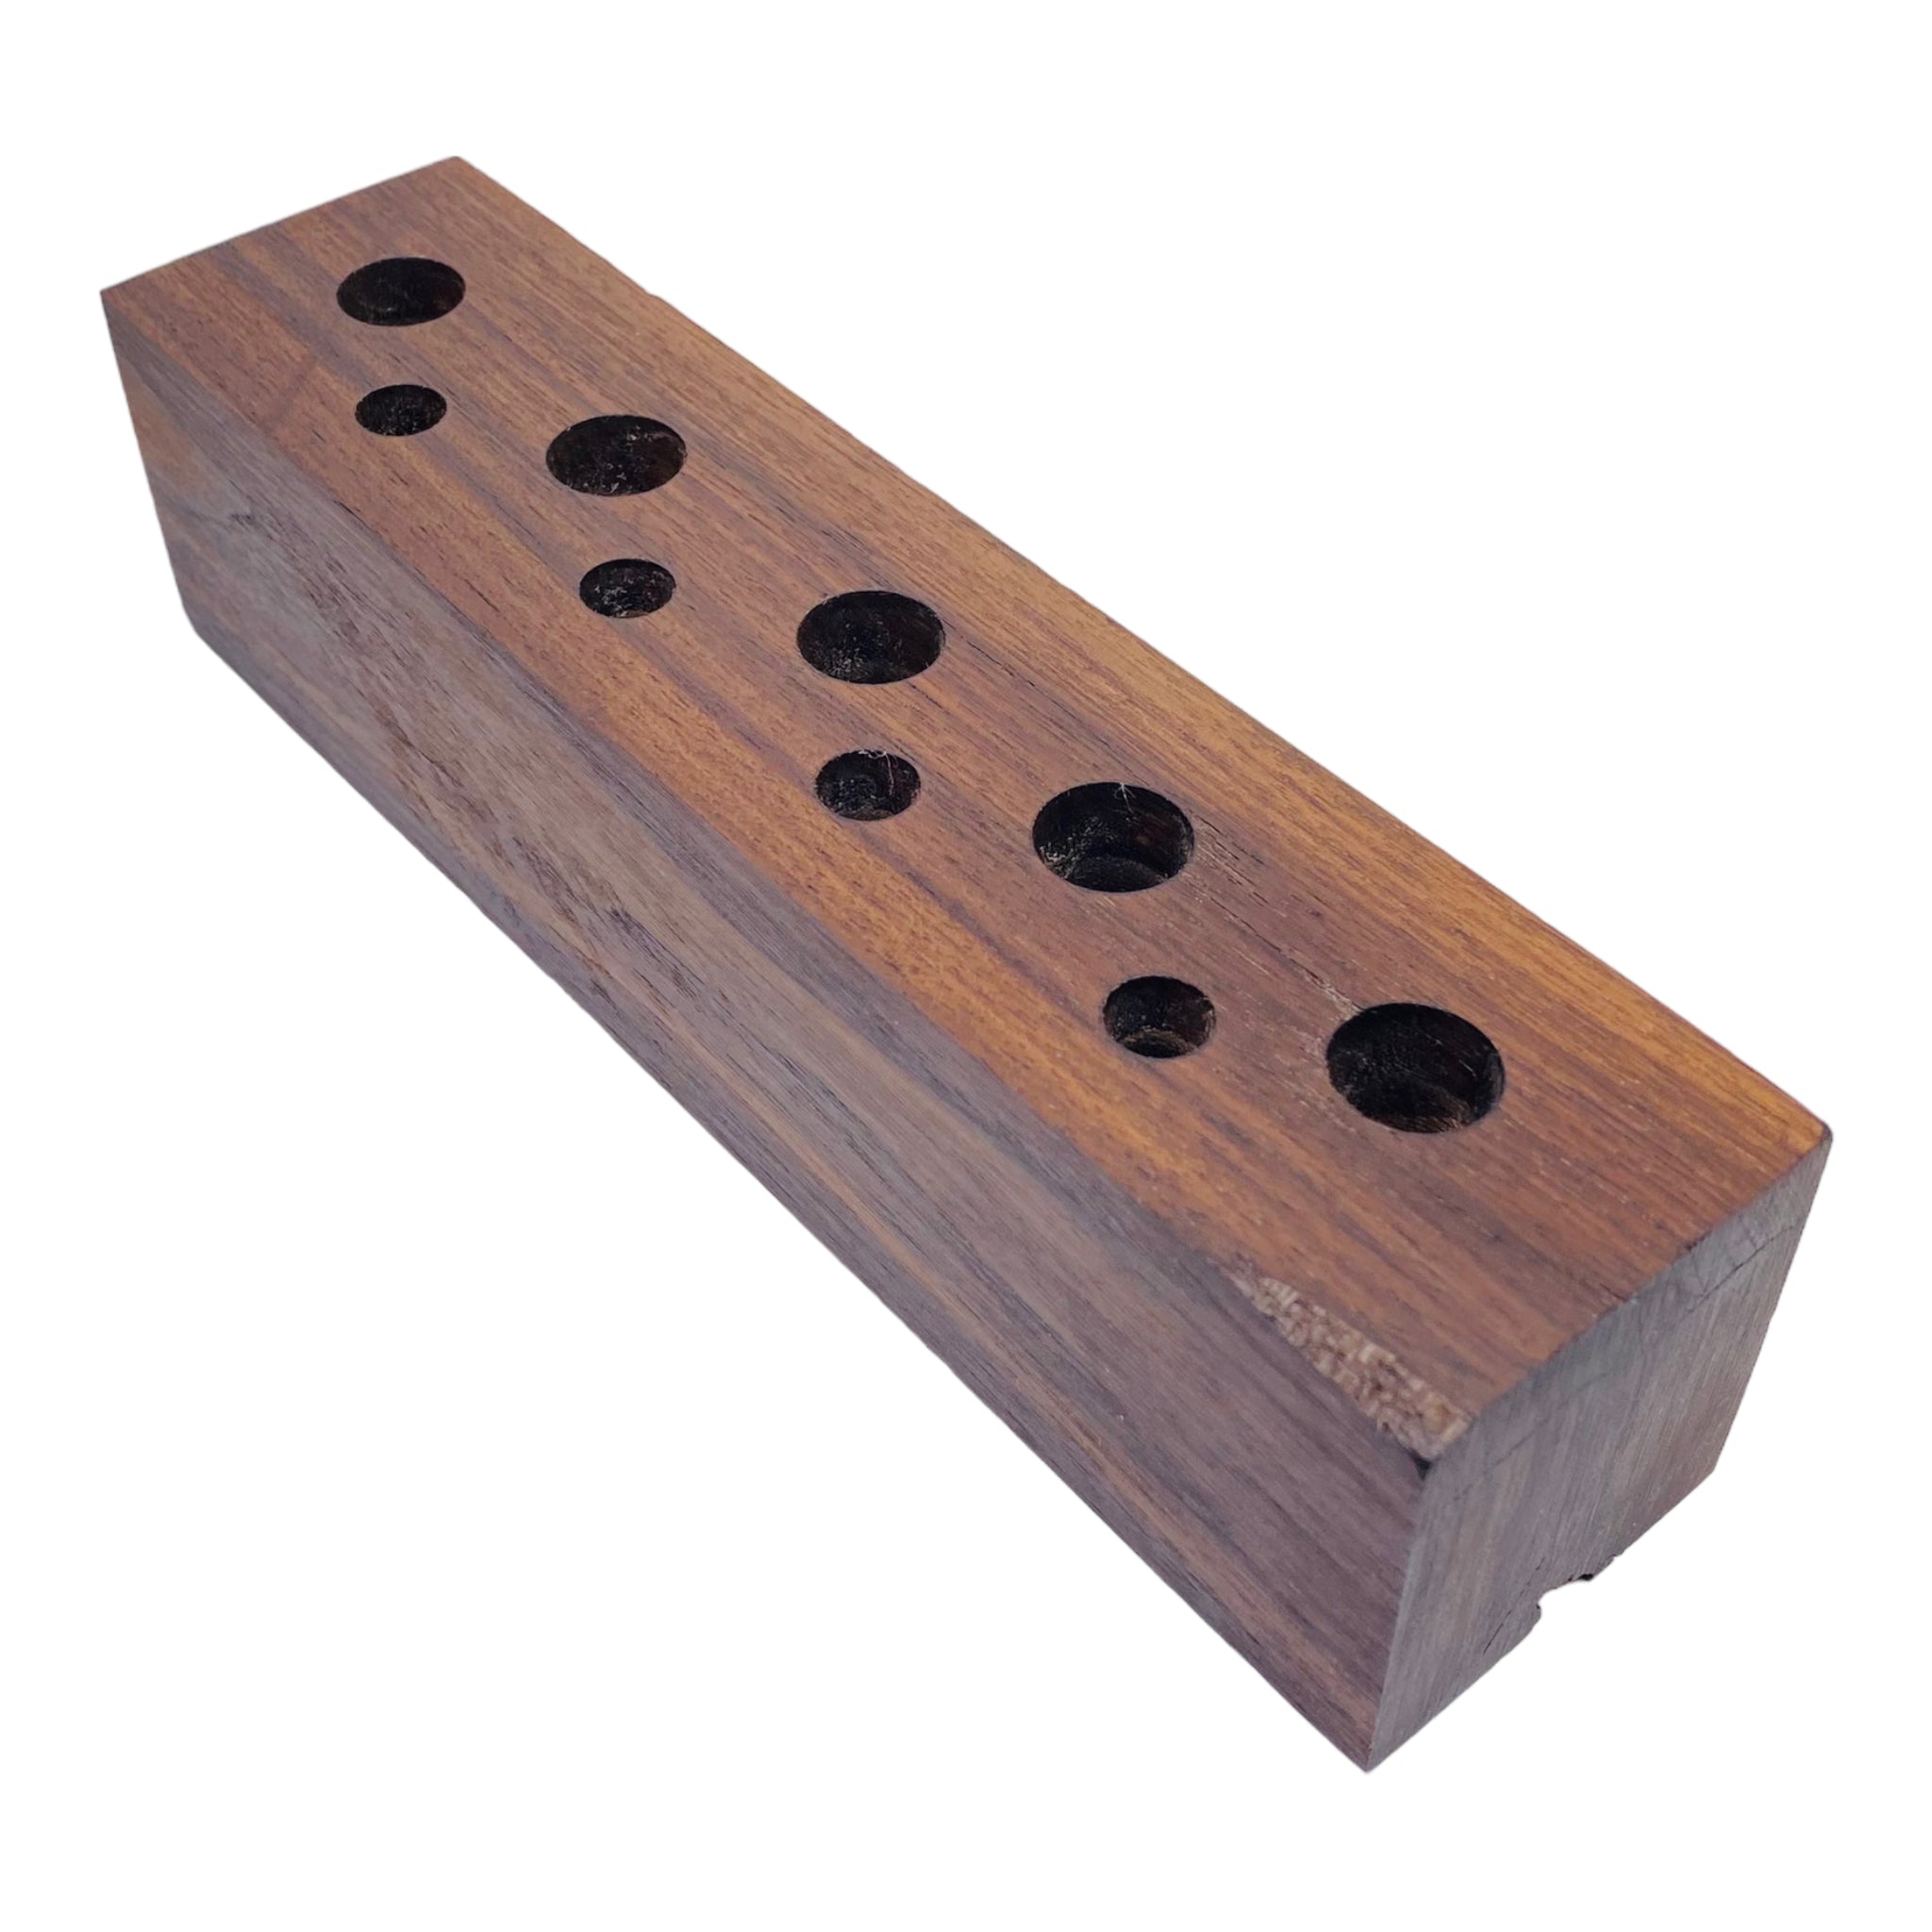 9 Hole Wood Display Stand Holder For 14mm And 10mm Bong Bowl Pieces Or Quartz Bangers made from black walnut